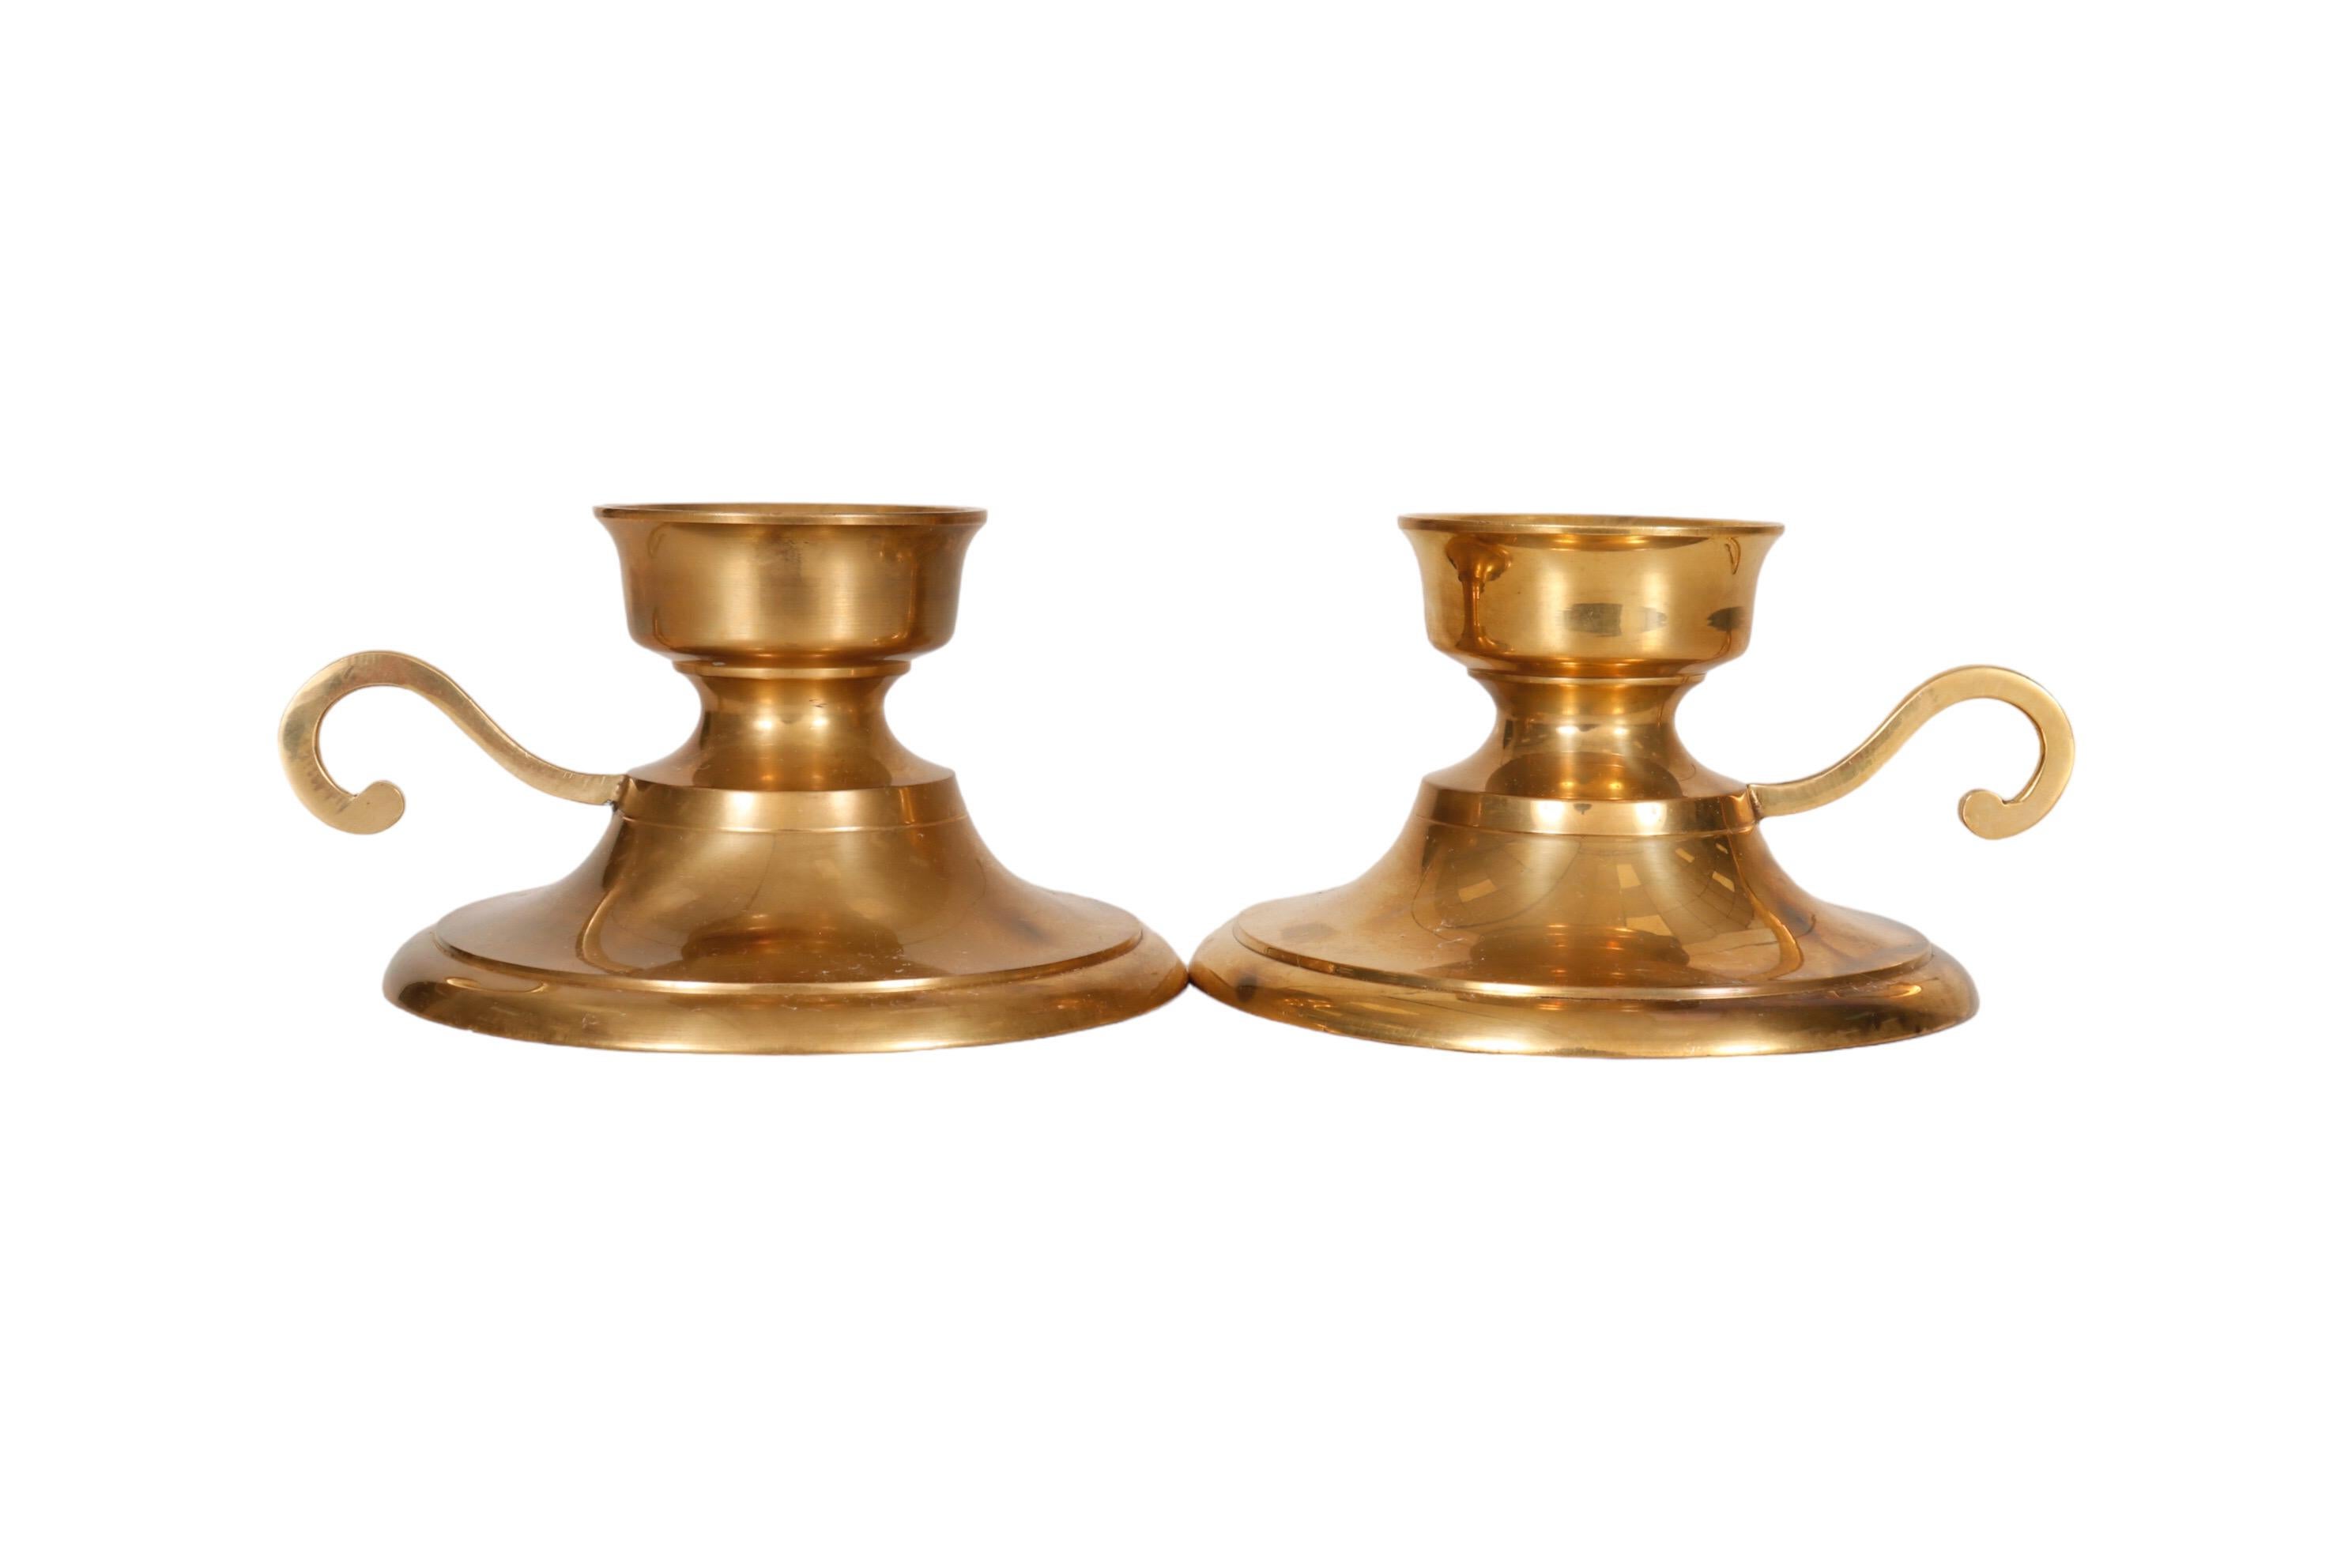 A pair of brass chamber stick candle holders. Each has a short capital with a spike to secure the candle, with a curled brass handle above a wide base. Dimensions per candle holder.